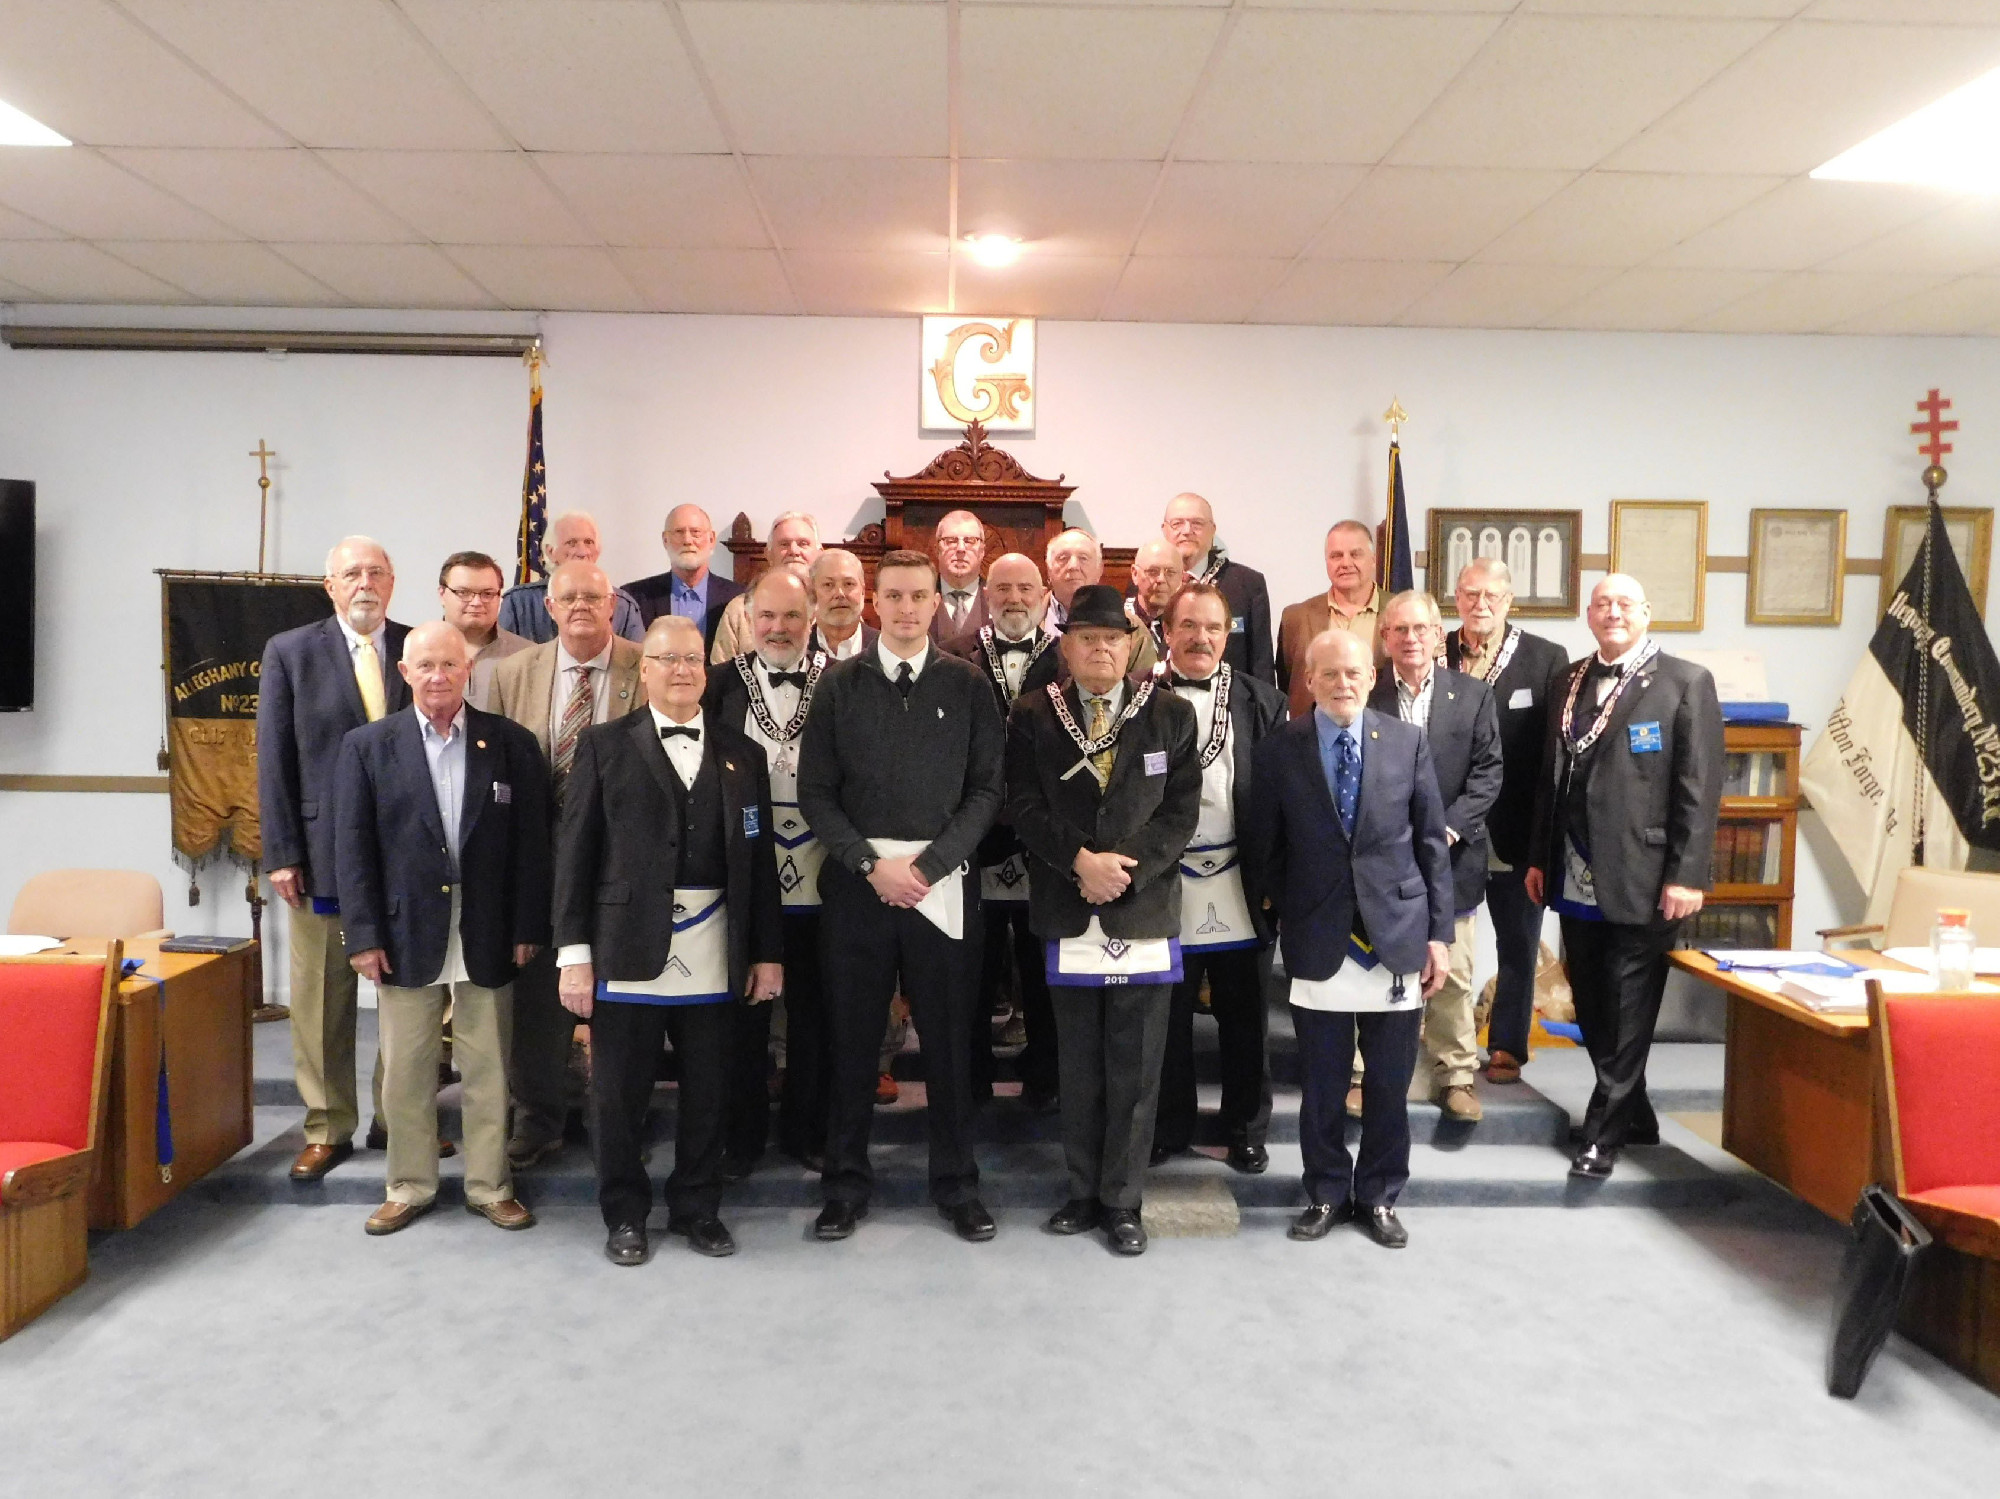 Virginia/U.S. - Clifton Forge Masonic Lodge No. 166 welcomes Brother Meadows